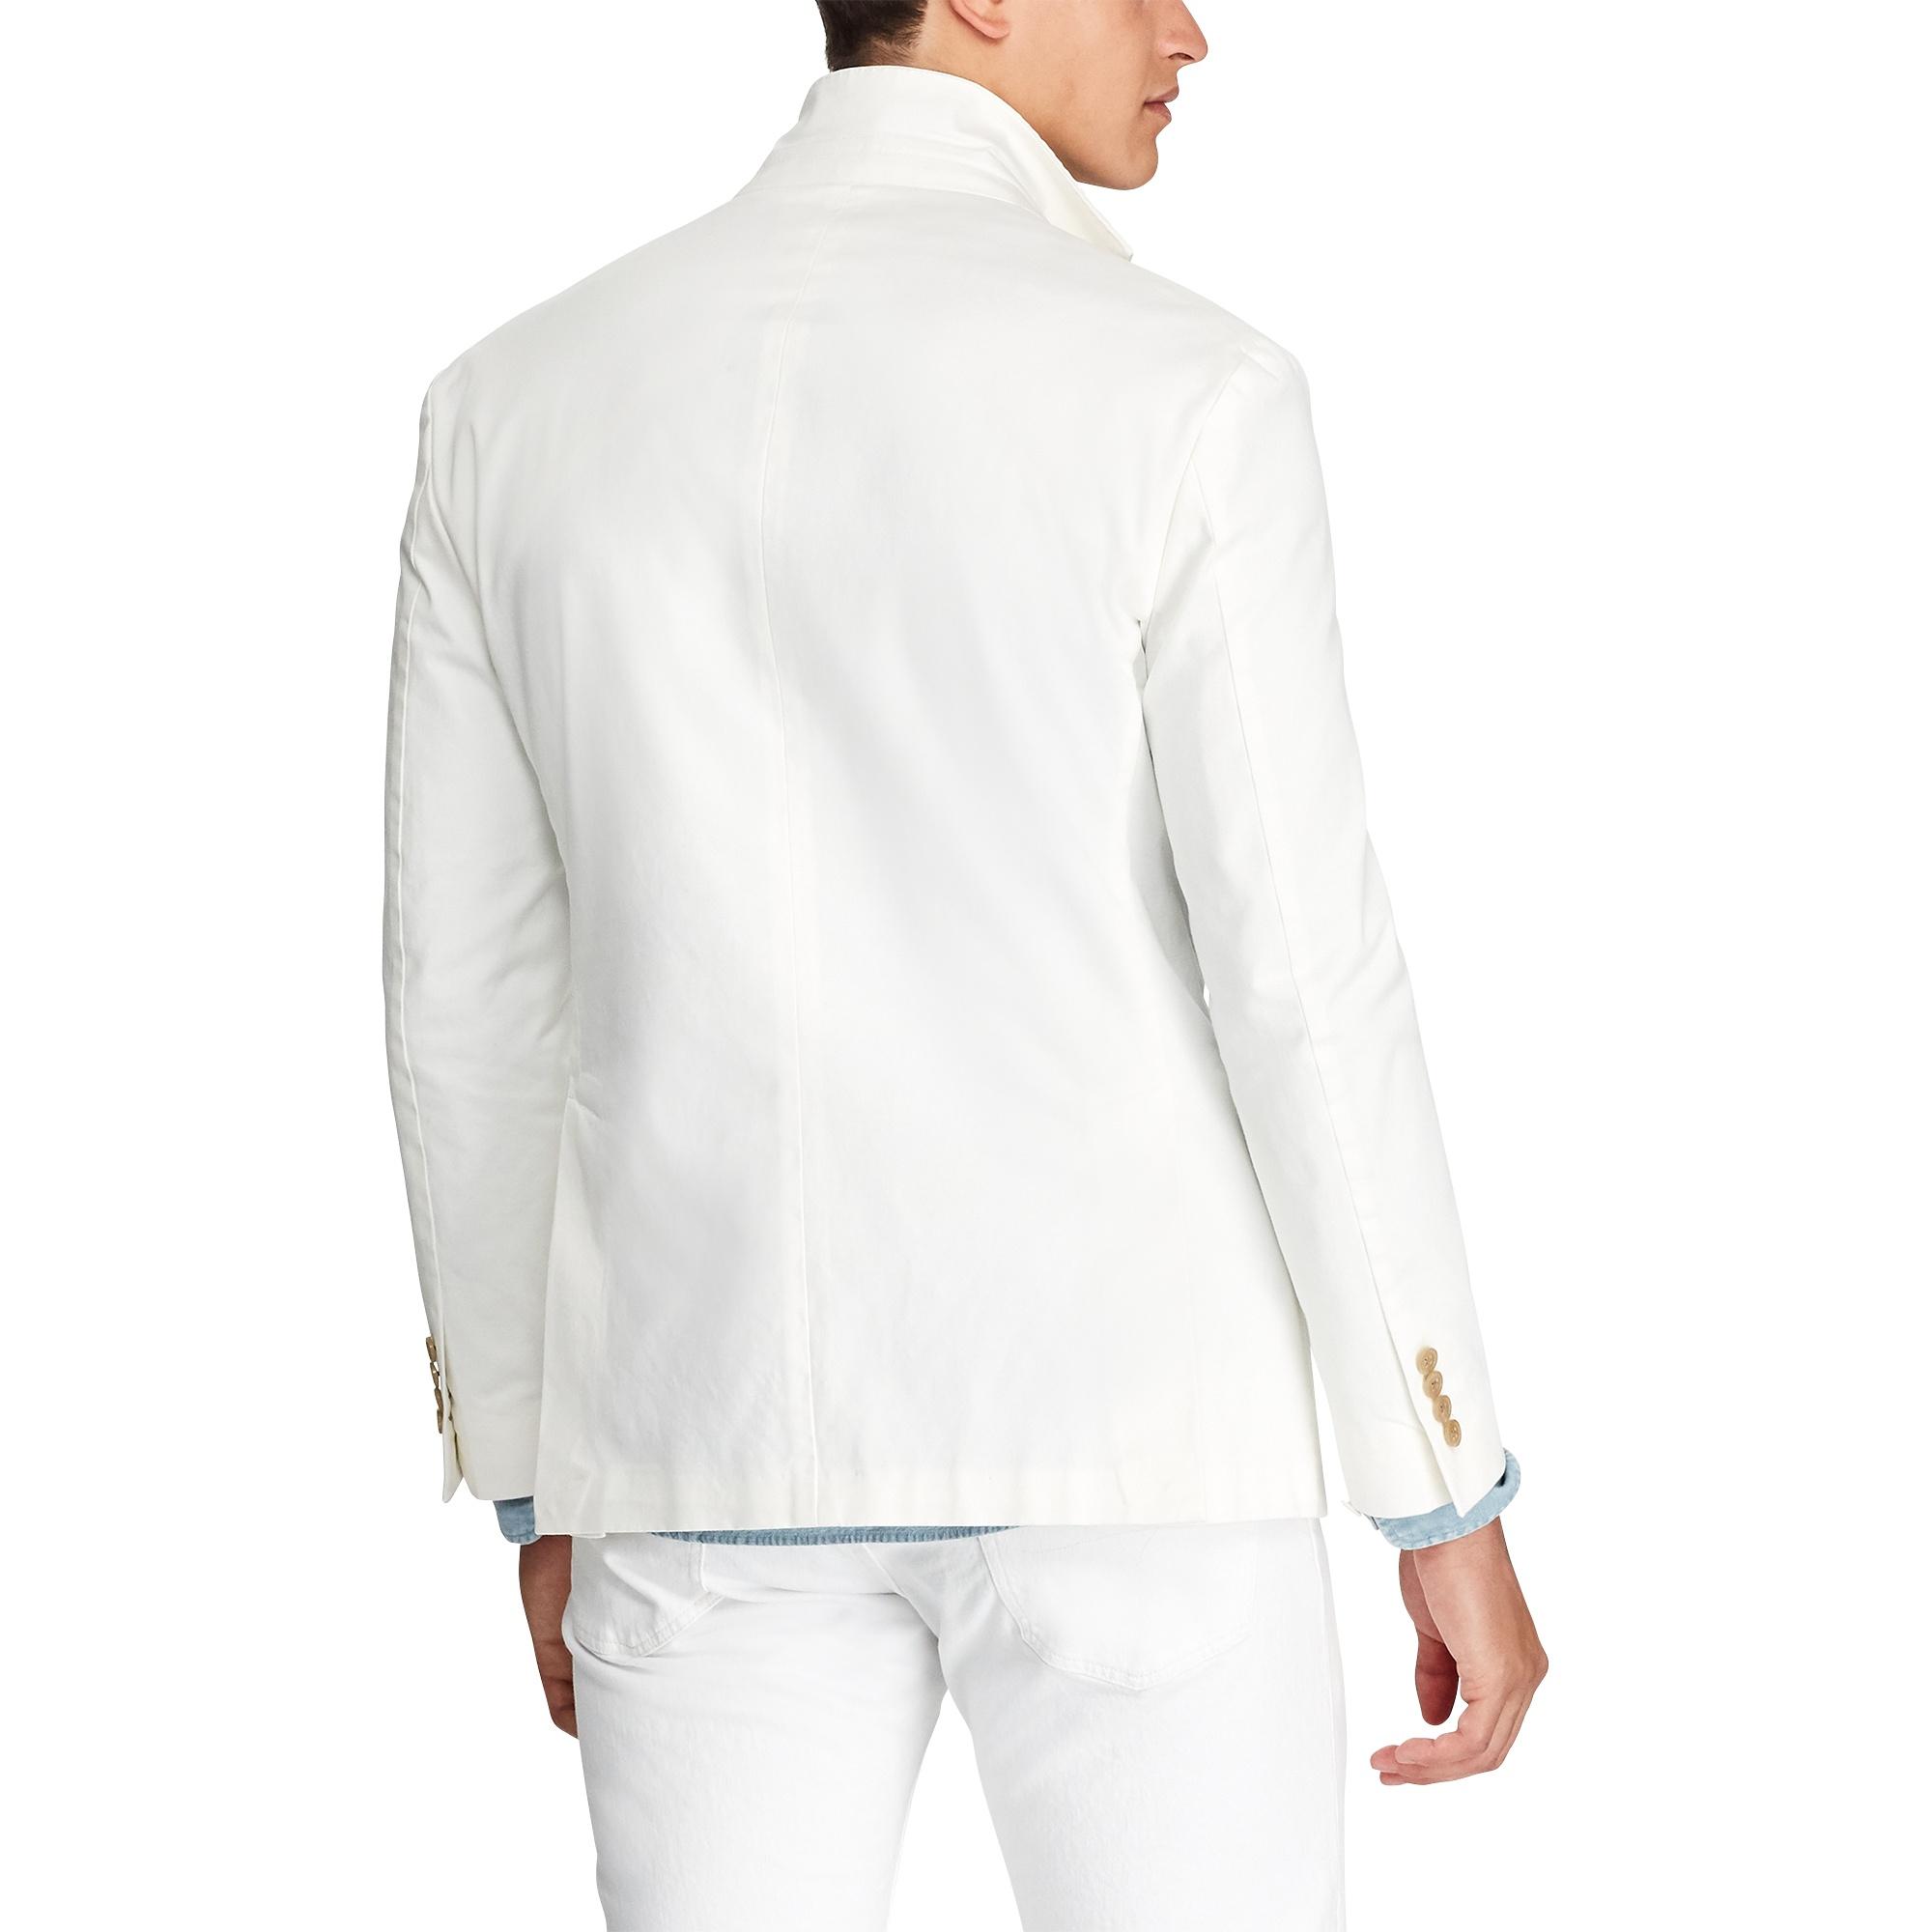 Polo Ralph Lauren Cotton Stretch Chino Suit Jacket in White for Men - Lyst